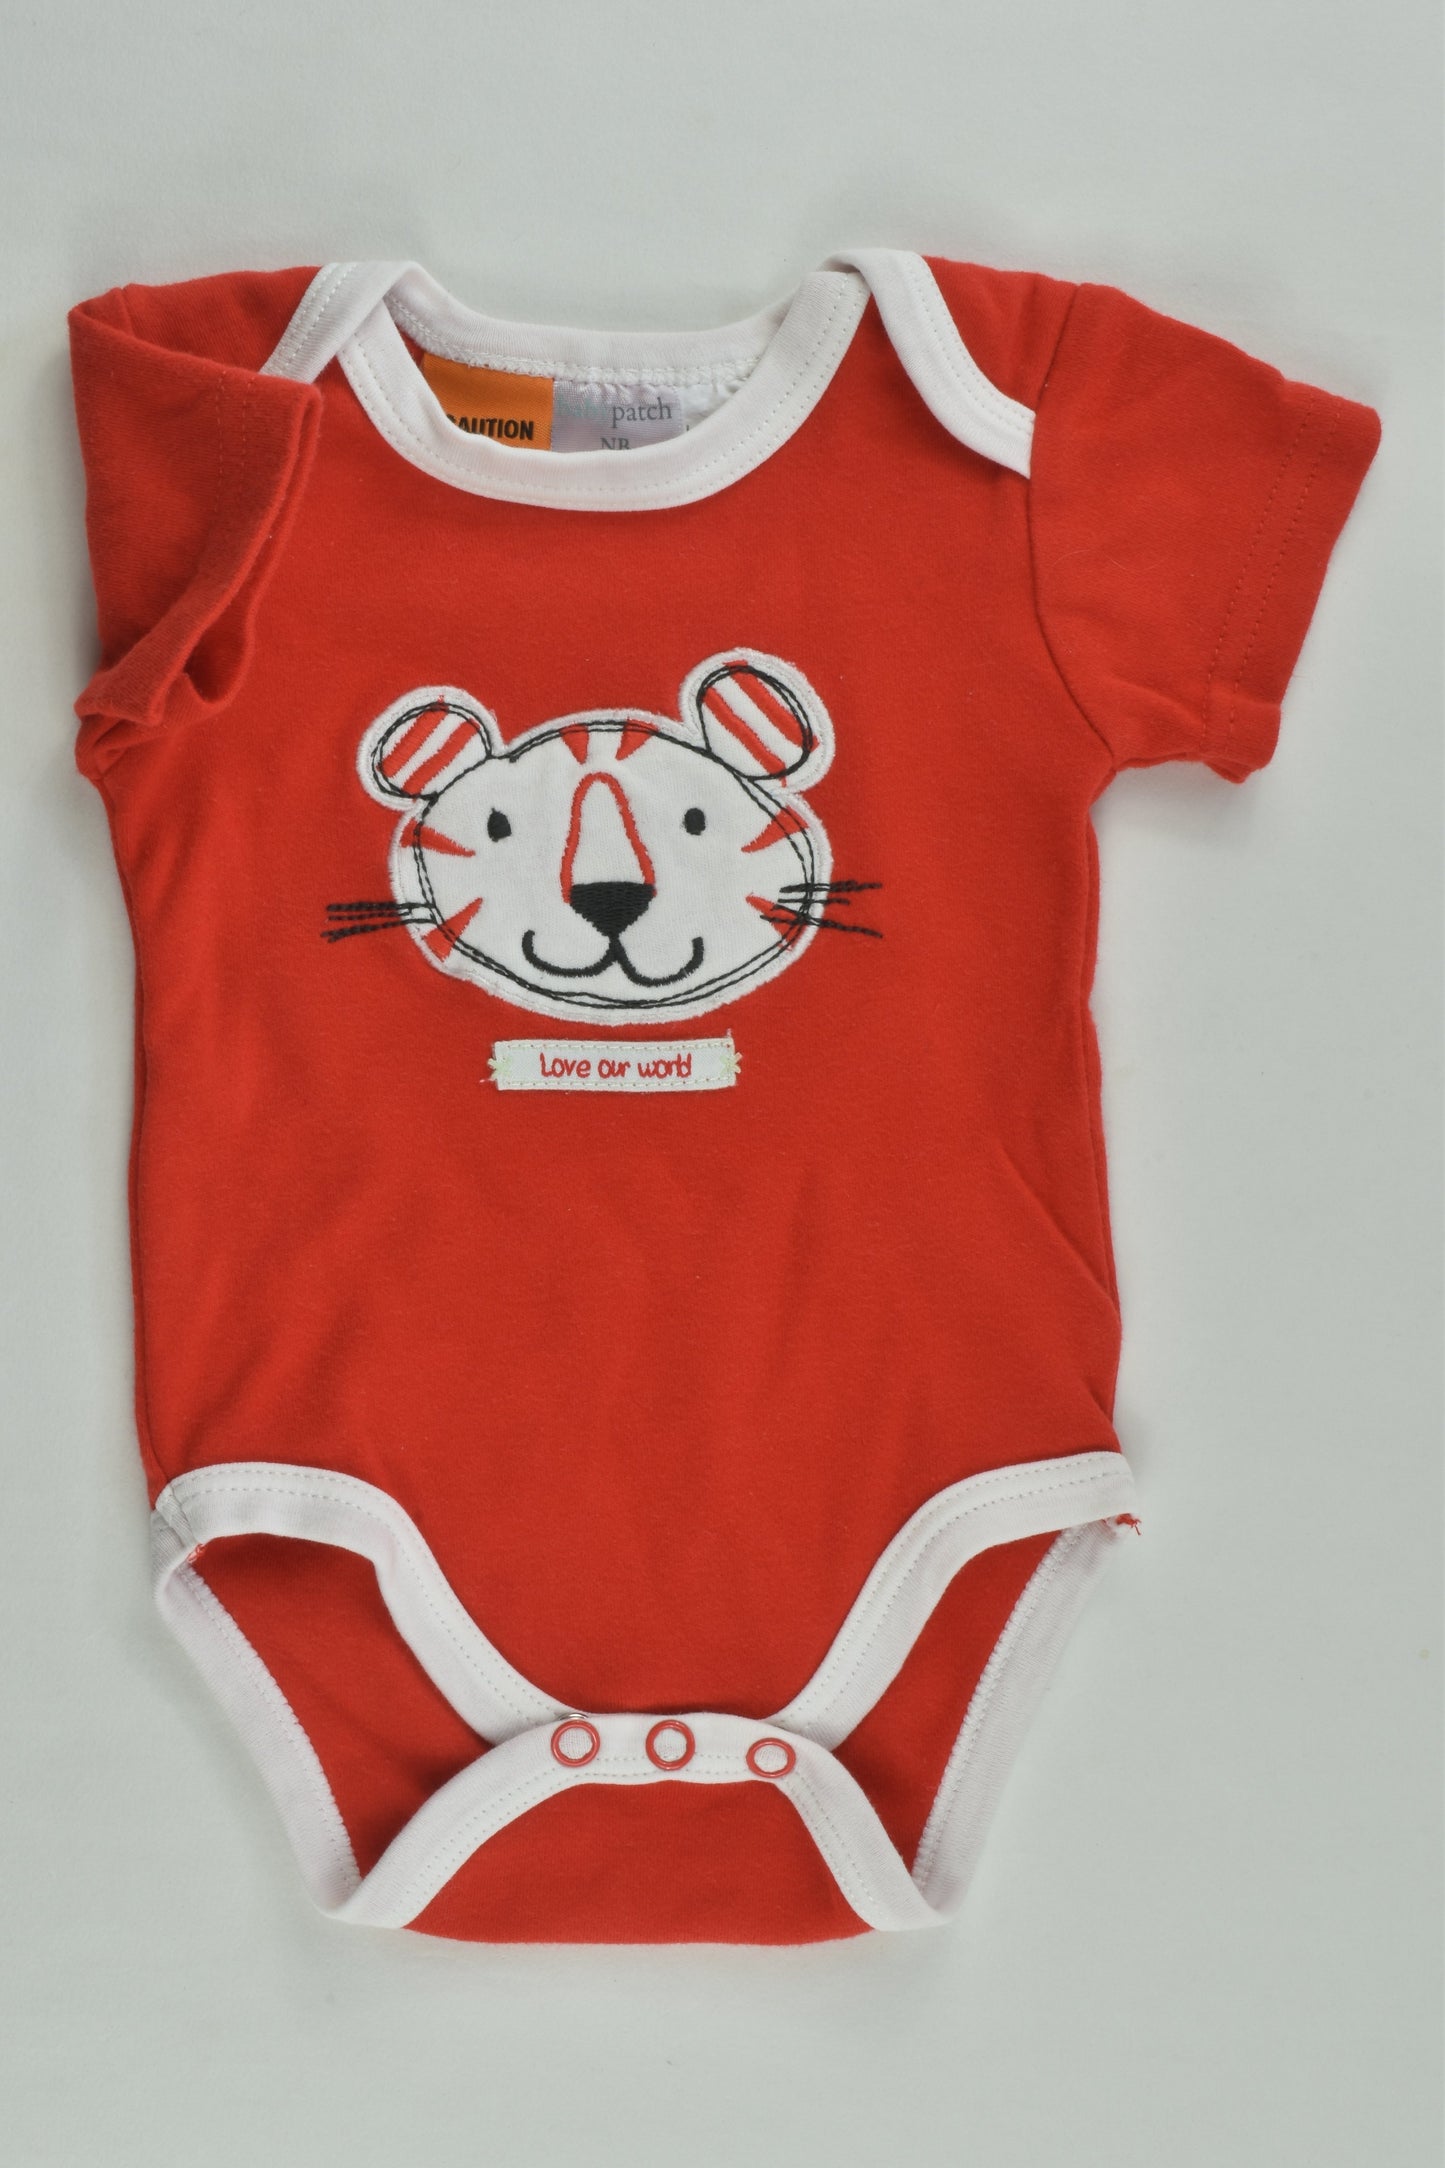 Baby Patch Size 0000 'Love Our World' Bodysuit